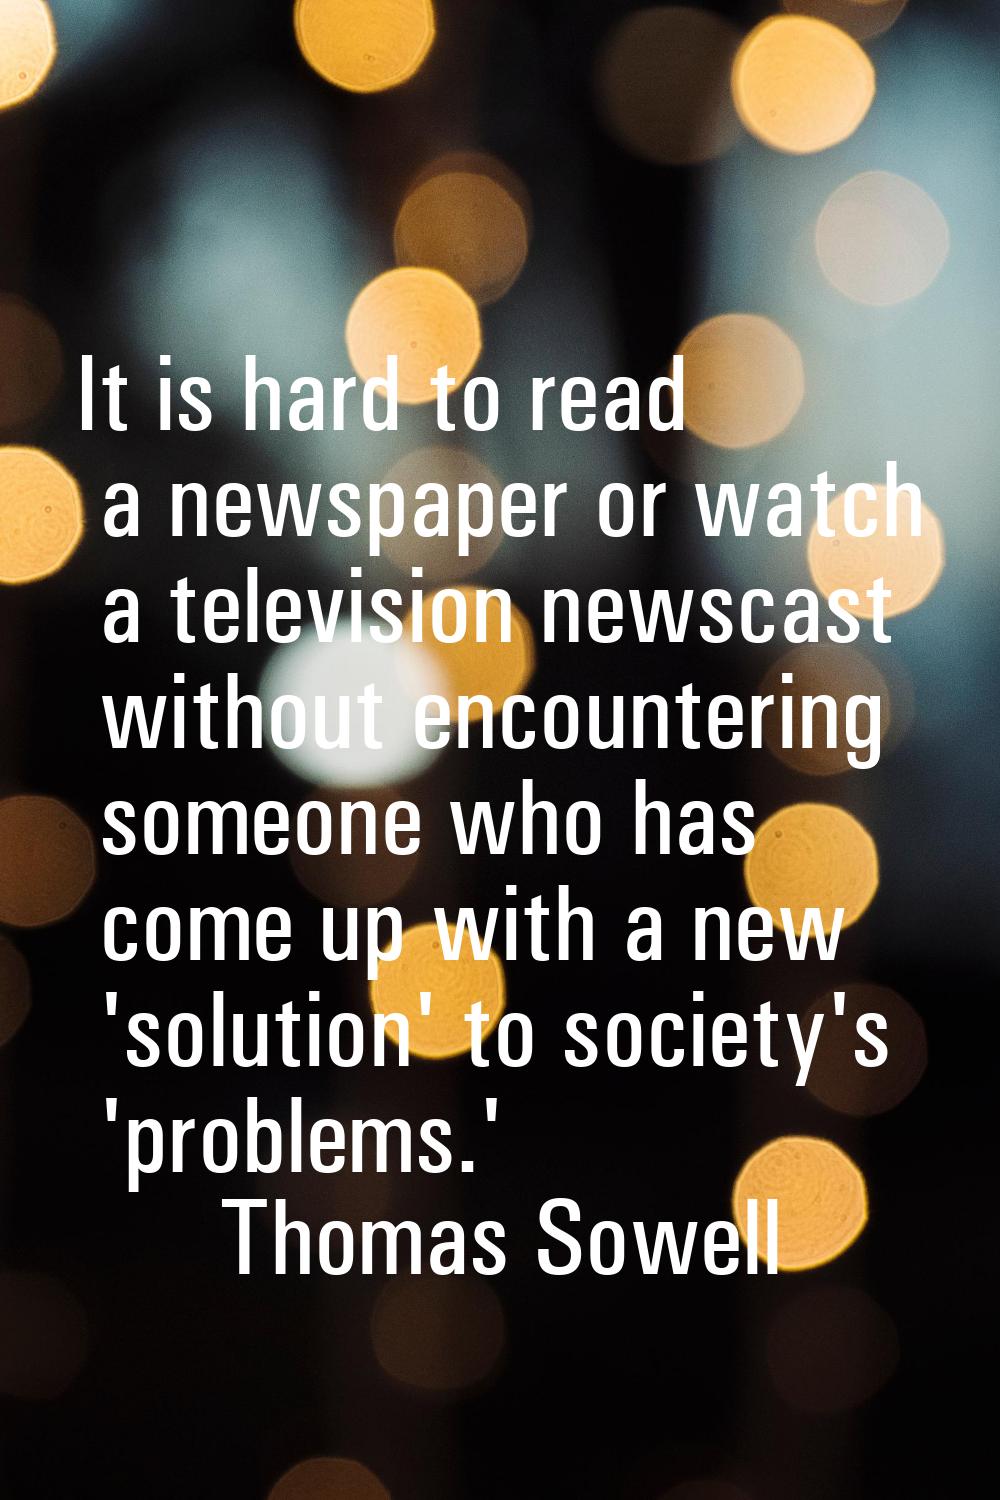 It is hard to read a newspaper or watch a television newscast without encountering someone who has 